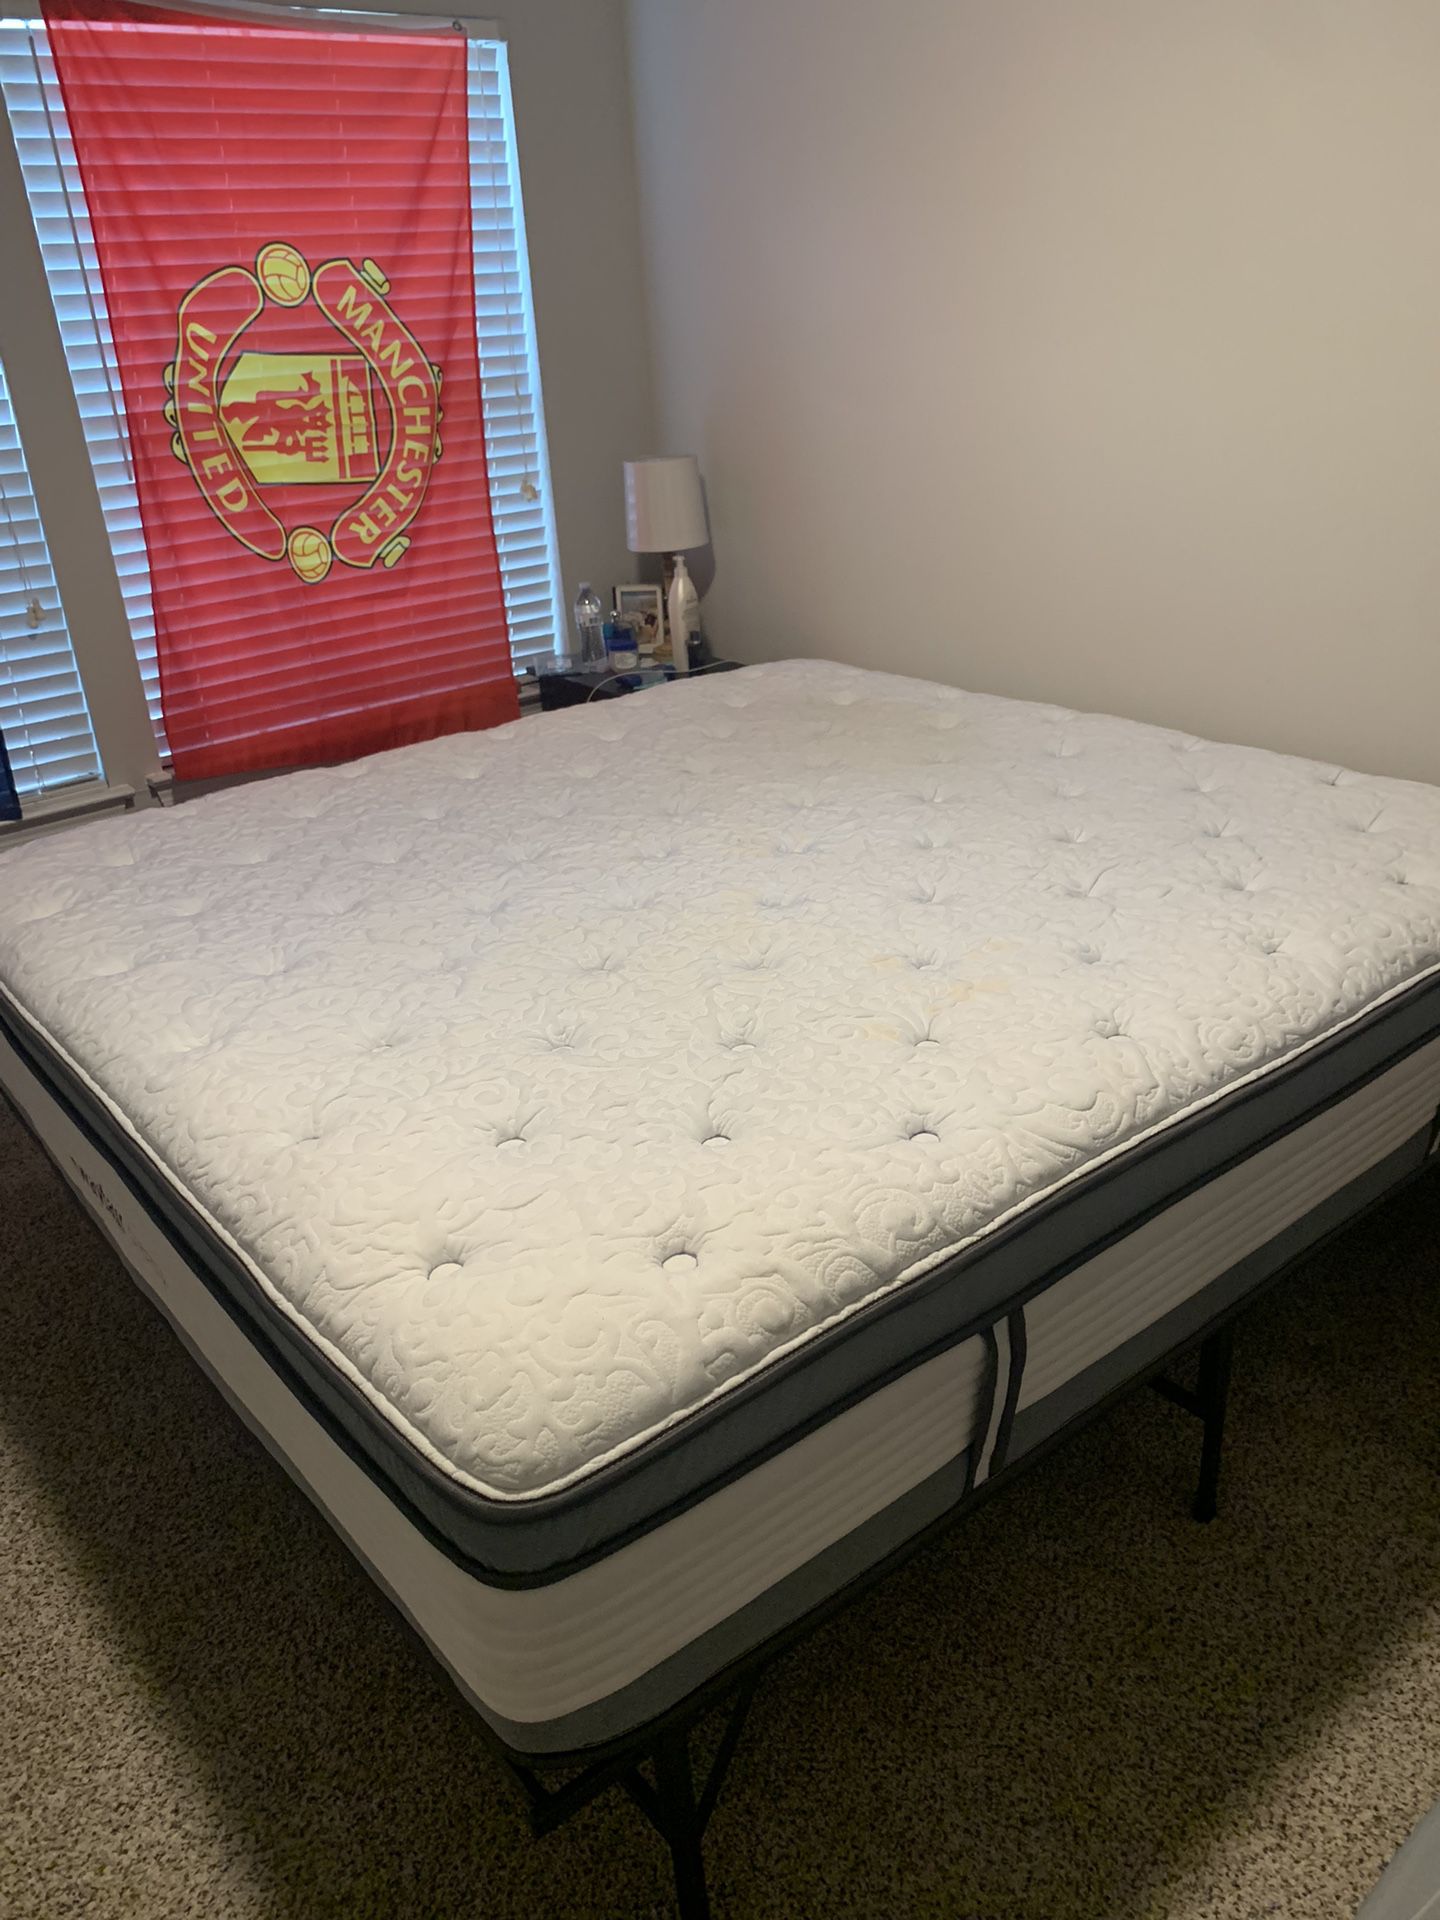 King Size Bed (frame Included)